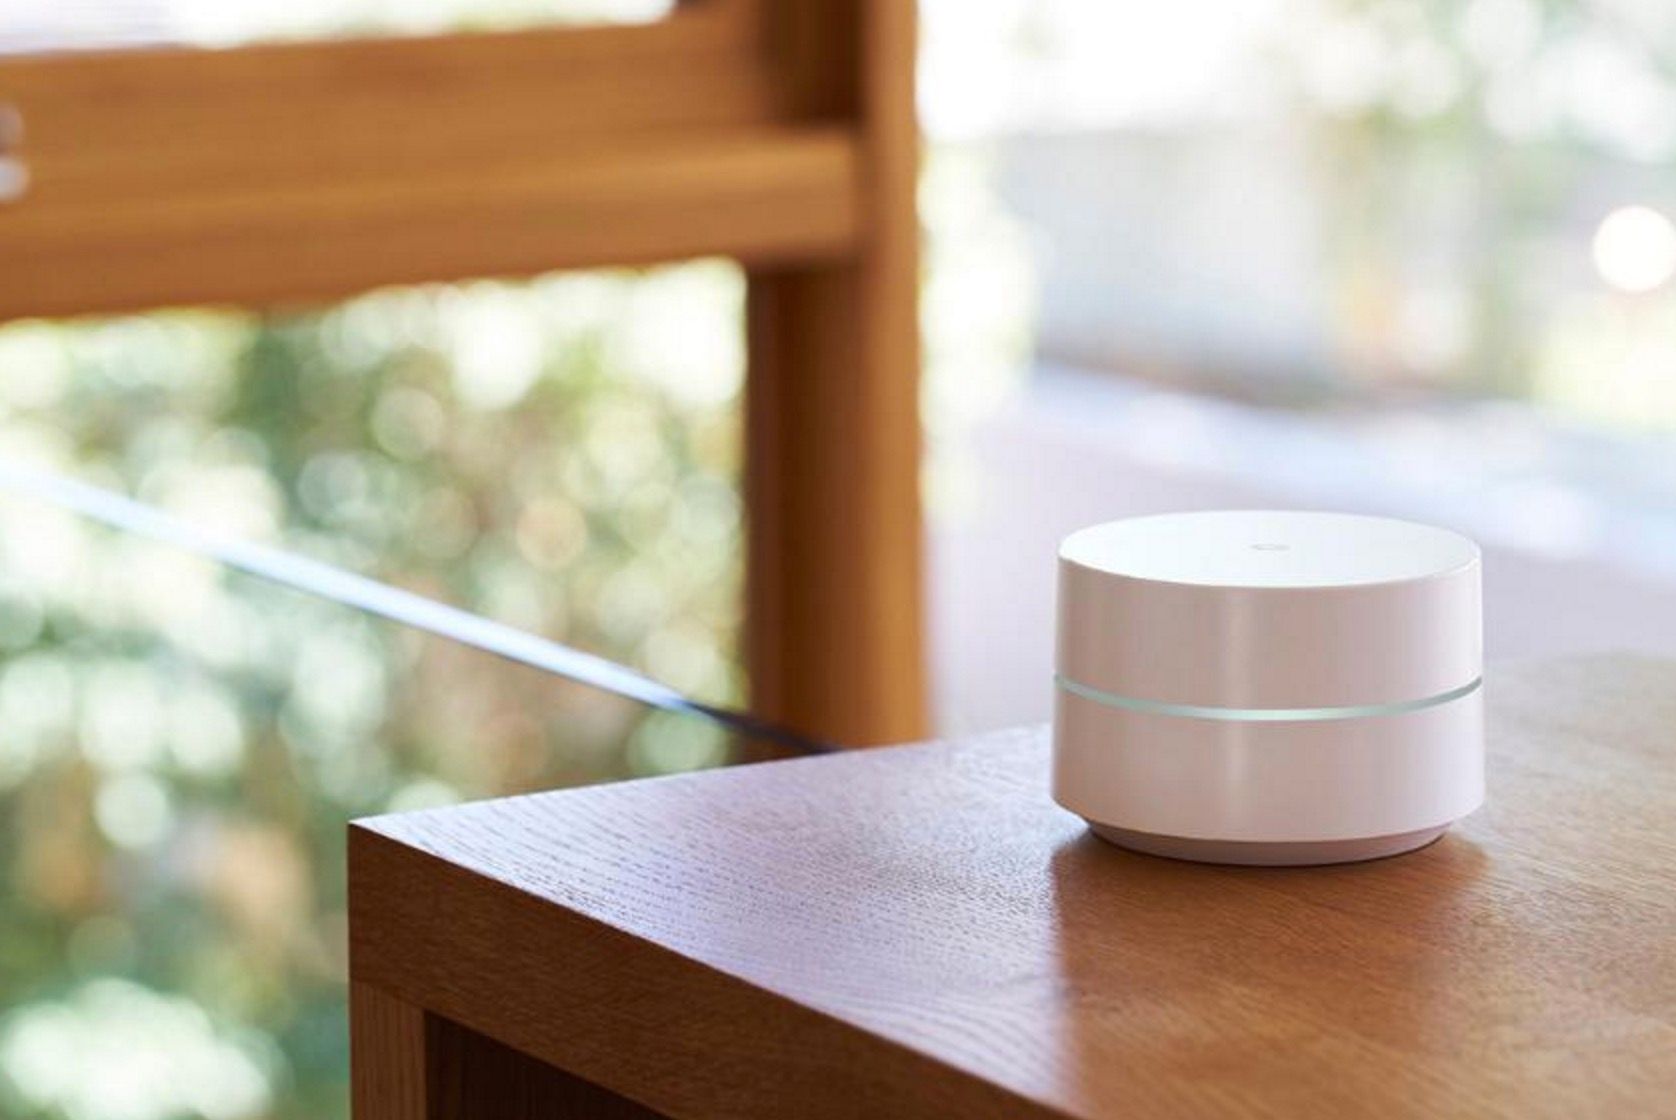 google wifi router will arrive in the uk on 6 april image 1